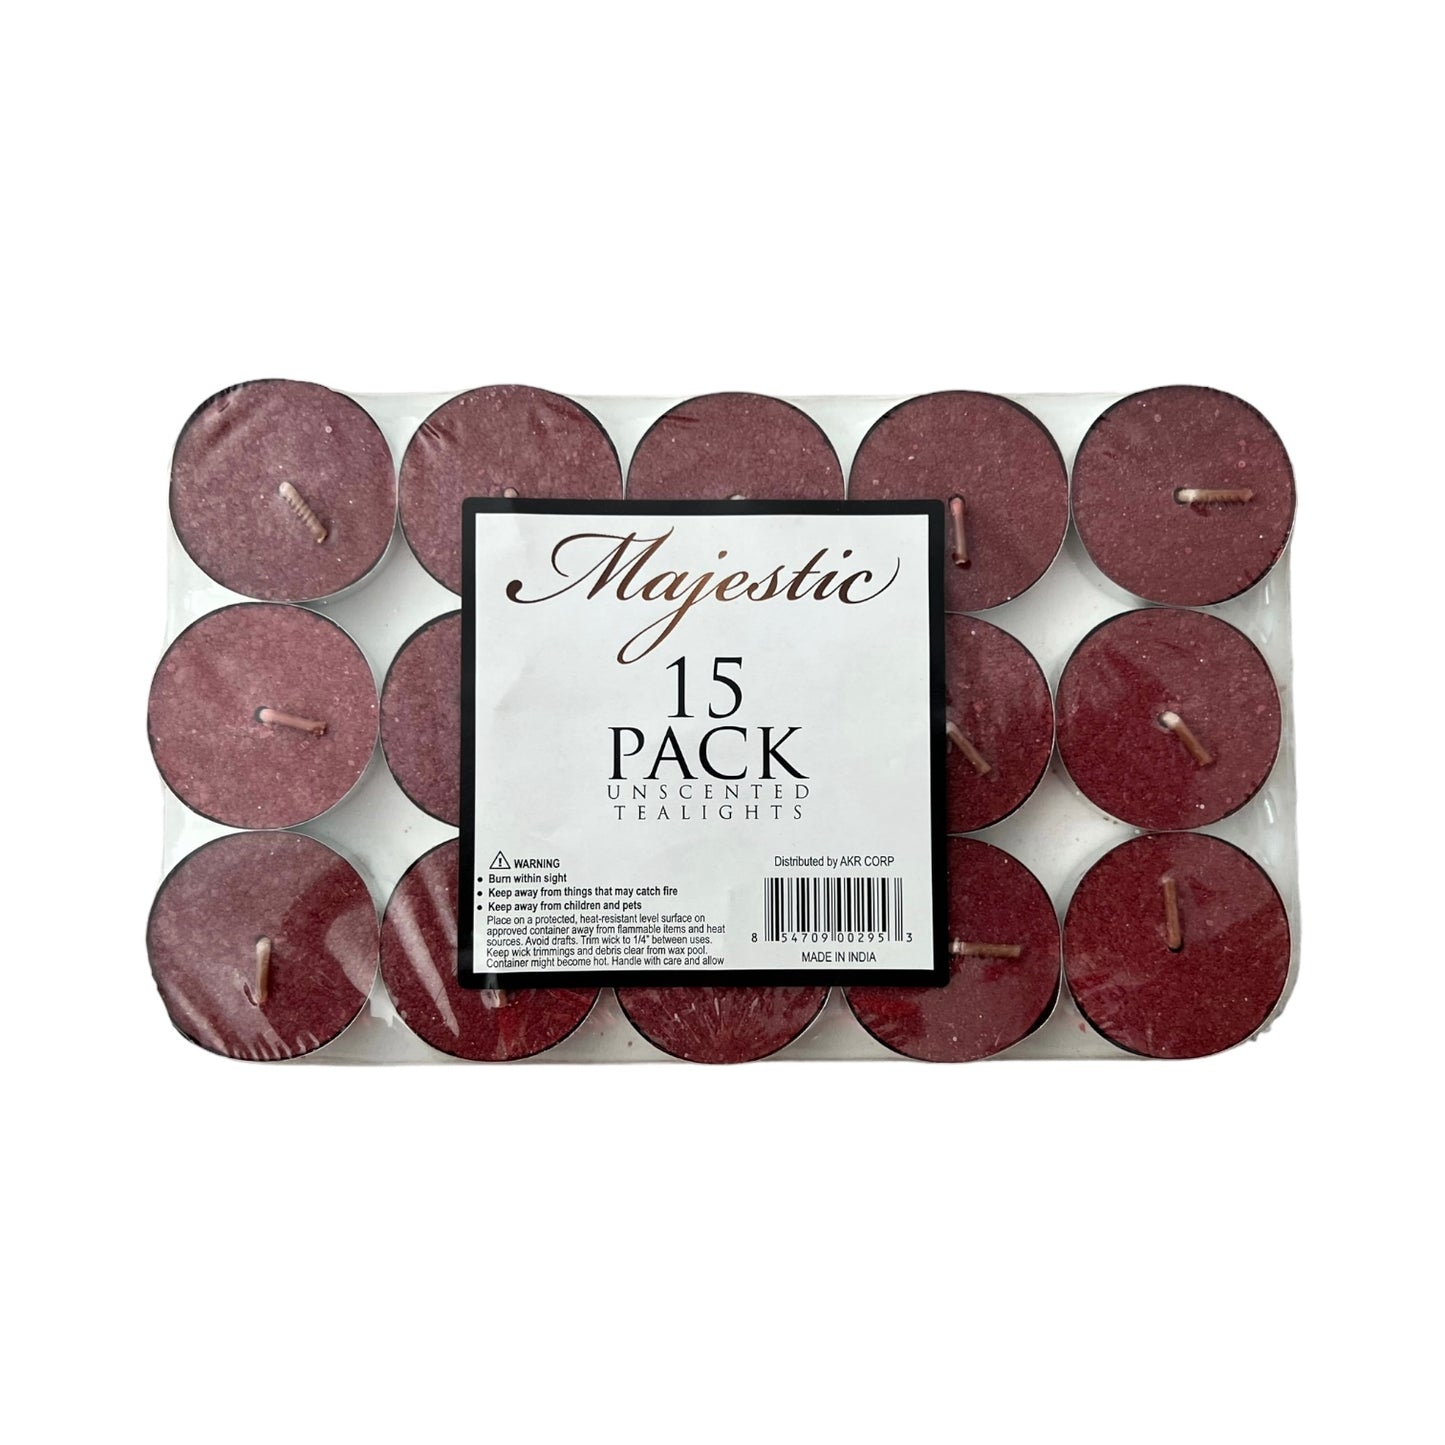 Majestic Unscented TeaLights 15-Pack Dozen 180 TOTAL